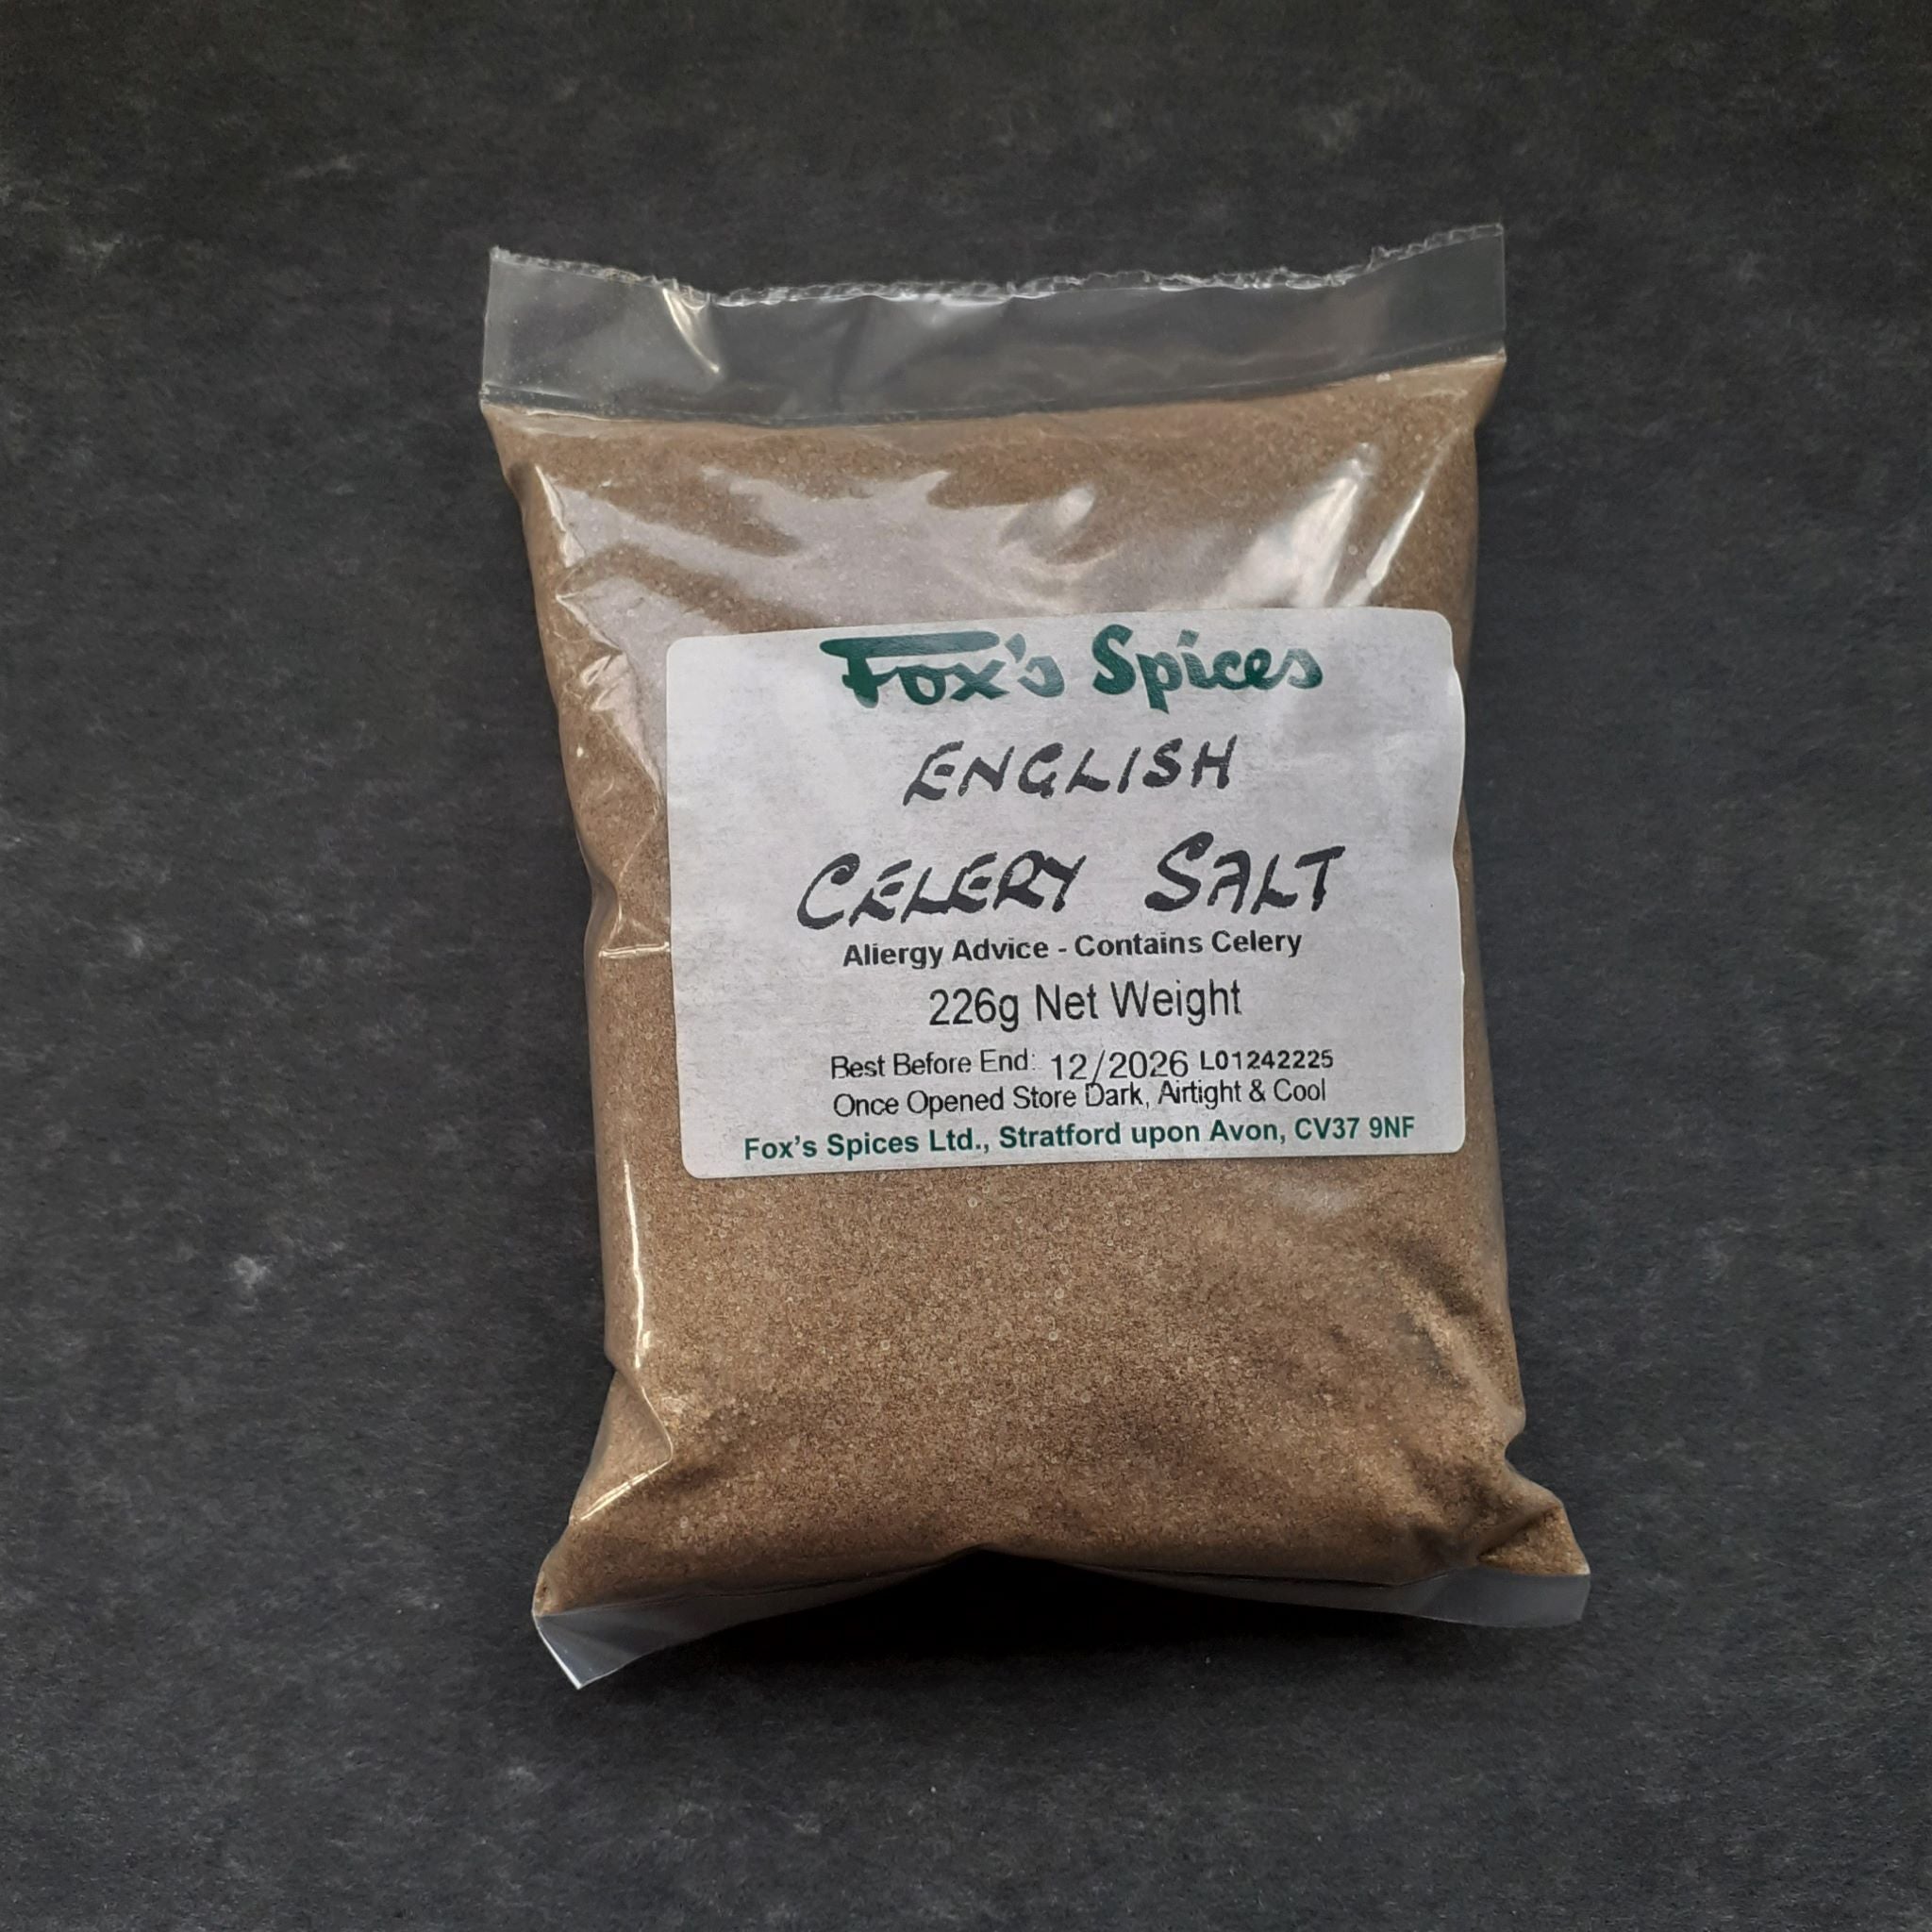 Fox's Spices supplied this 226g bag of Celery salt.